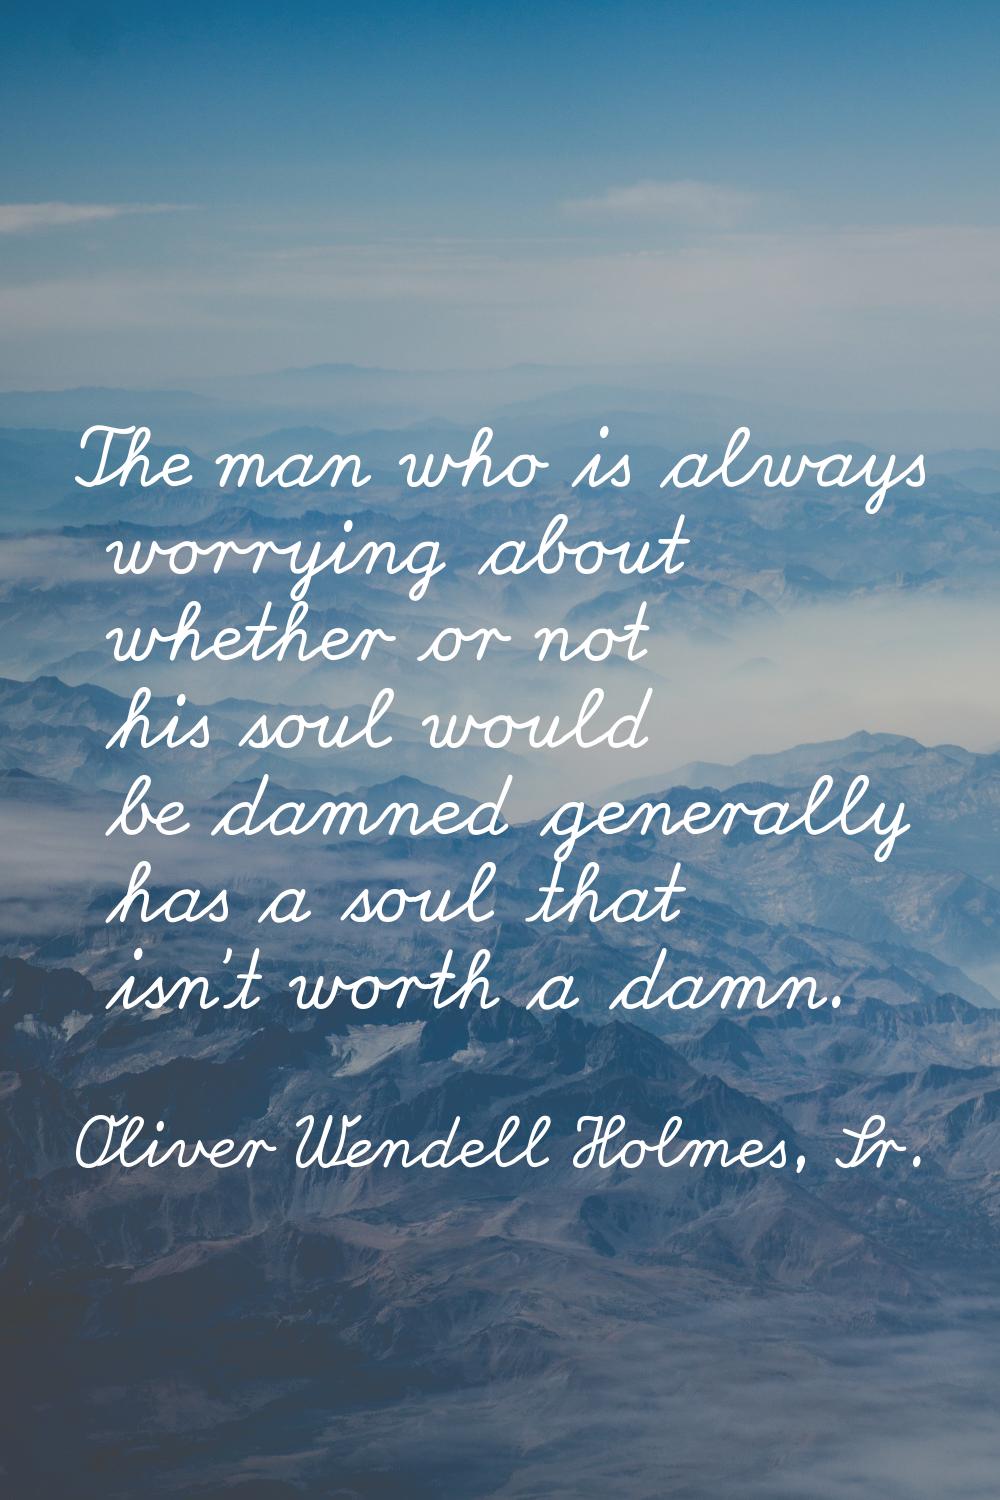 The man who is always worrying about whether or not his soul would be damned generally has a soul t